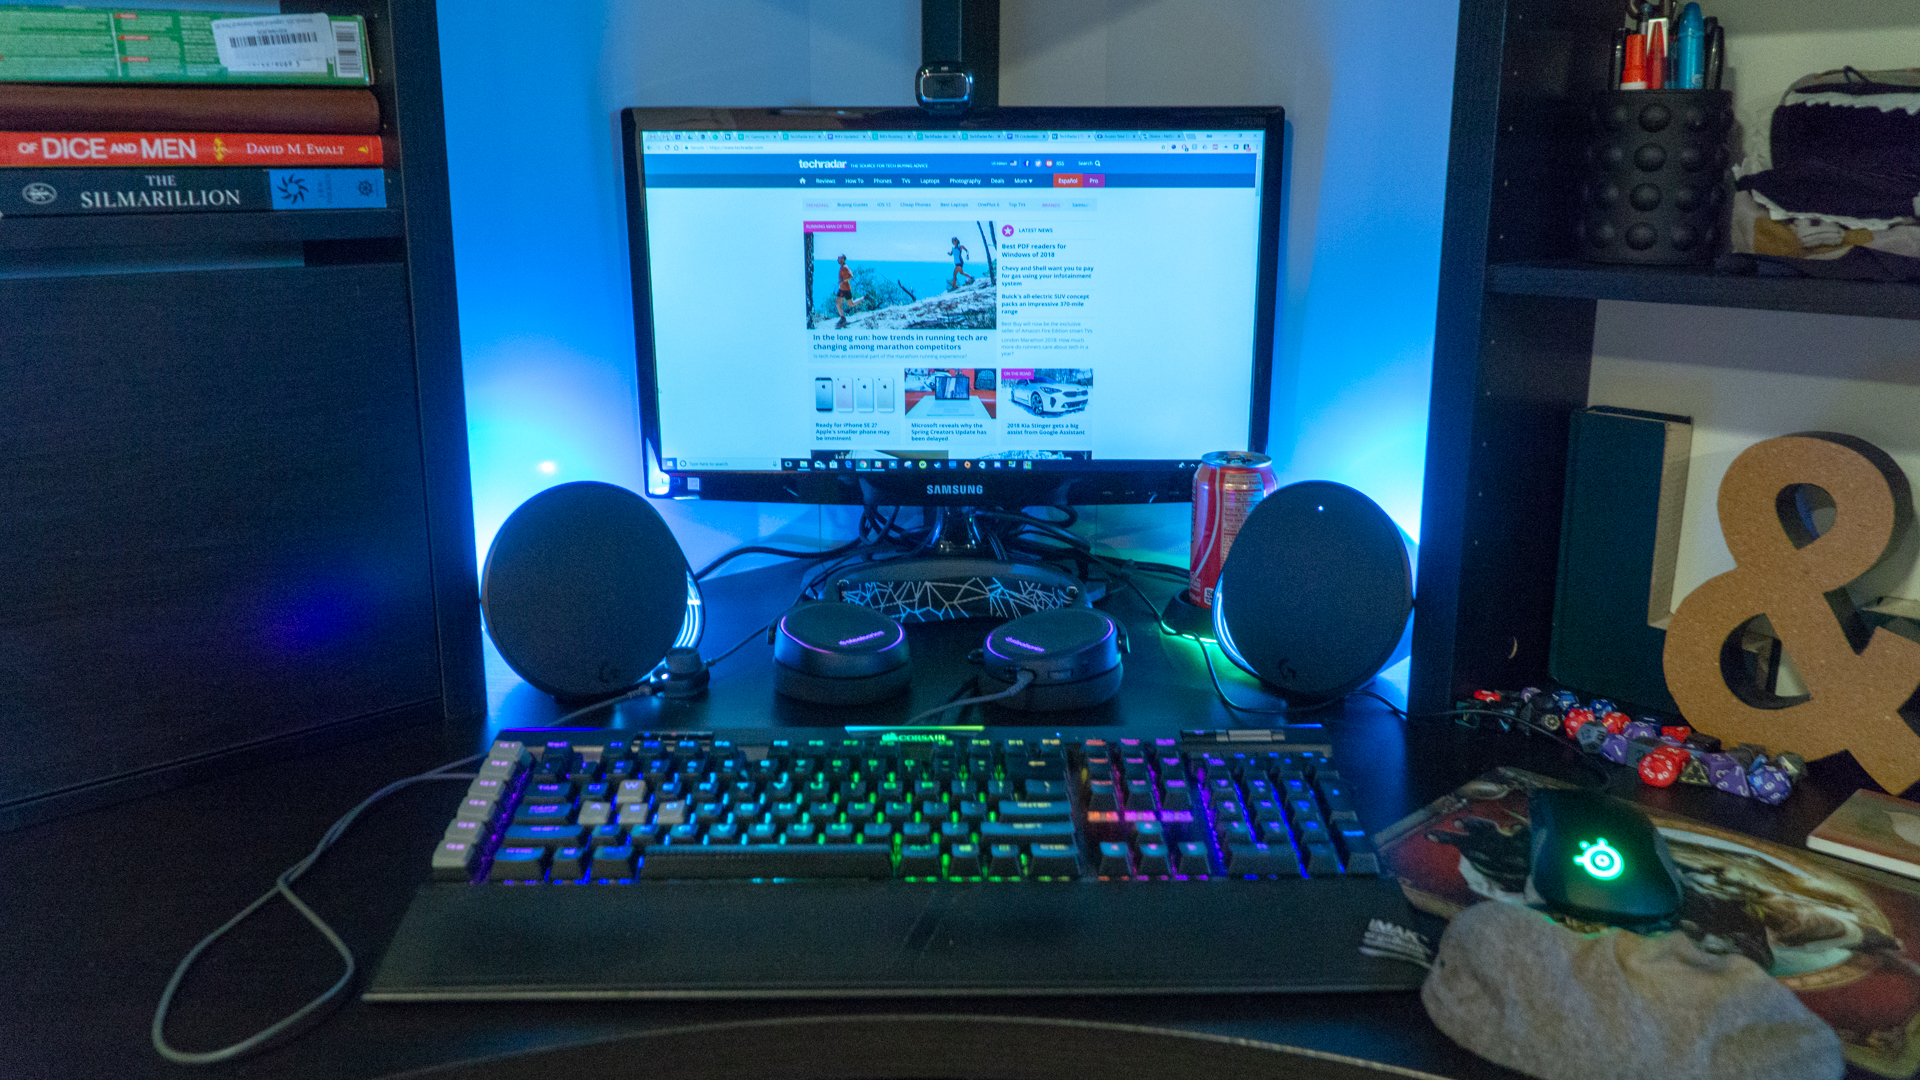 Logitech G560 gaming speakers review: The first truly useful RGB  peripheral, but it'll cost you